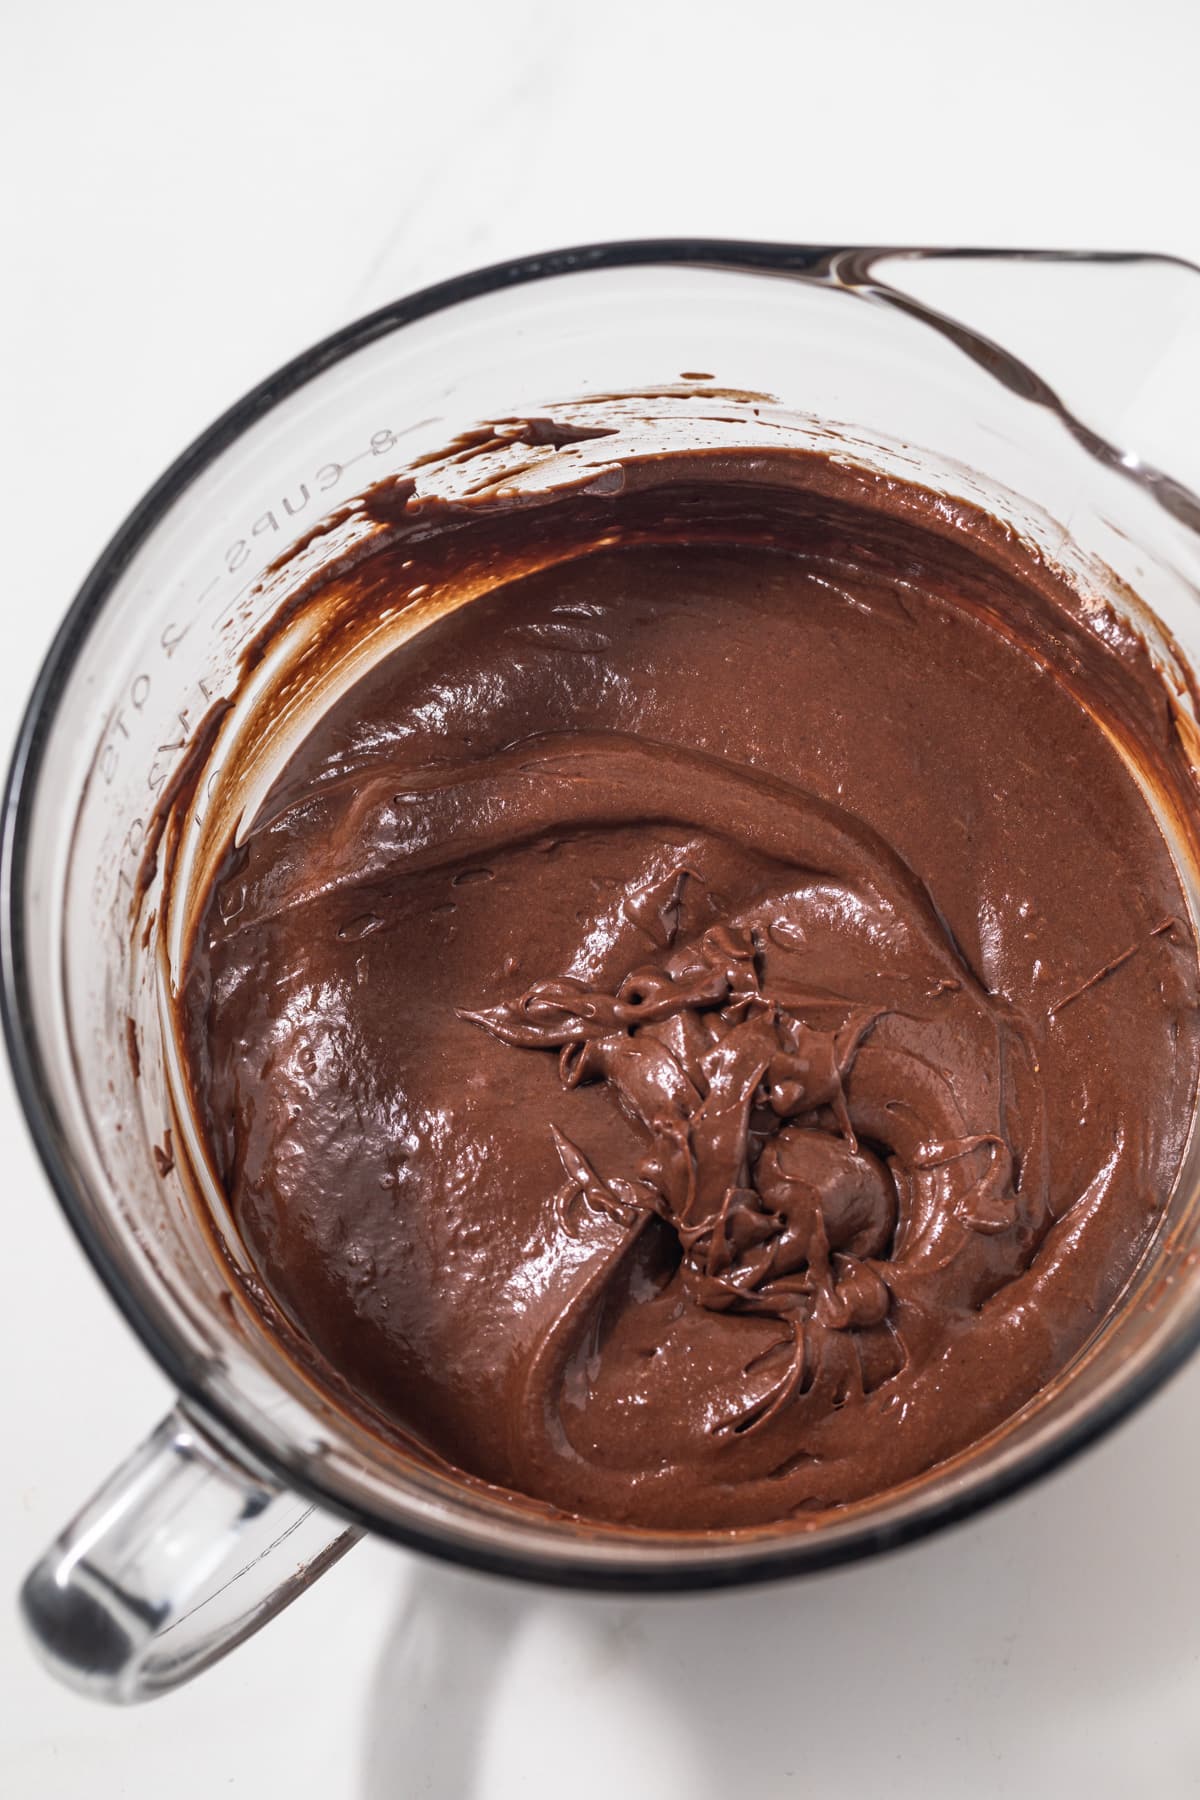 Chocolate cupcake batter in a glass bowl.